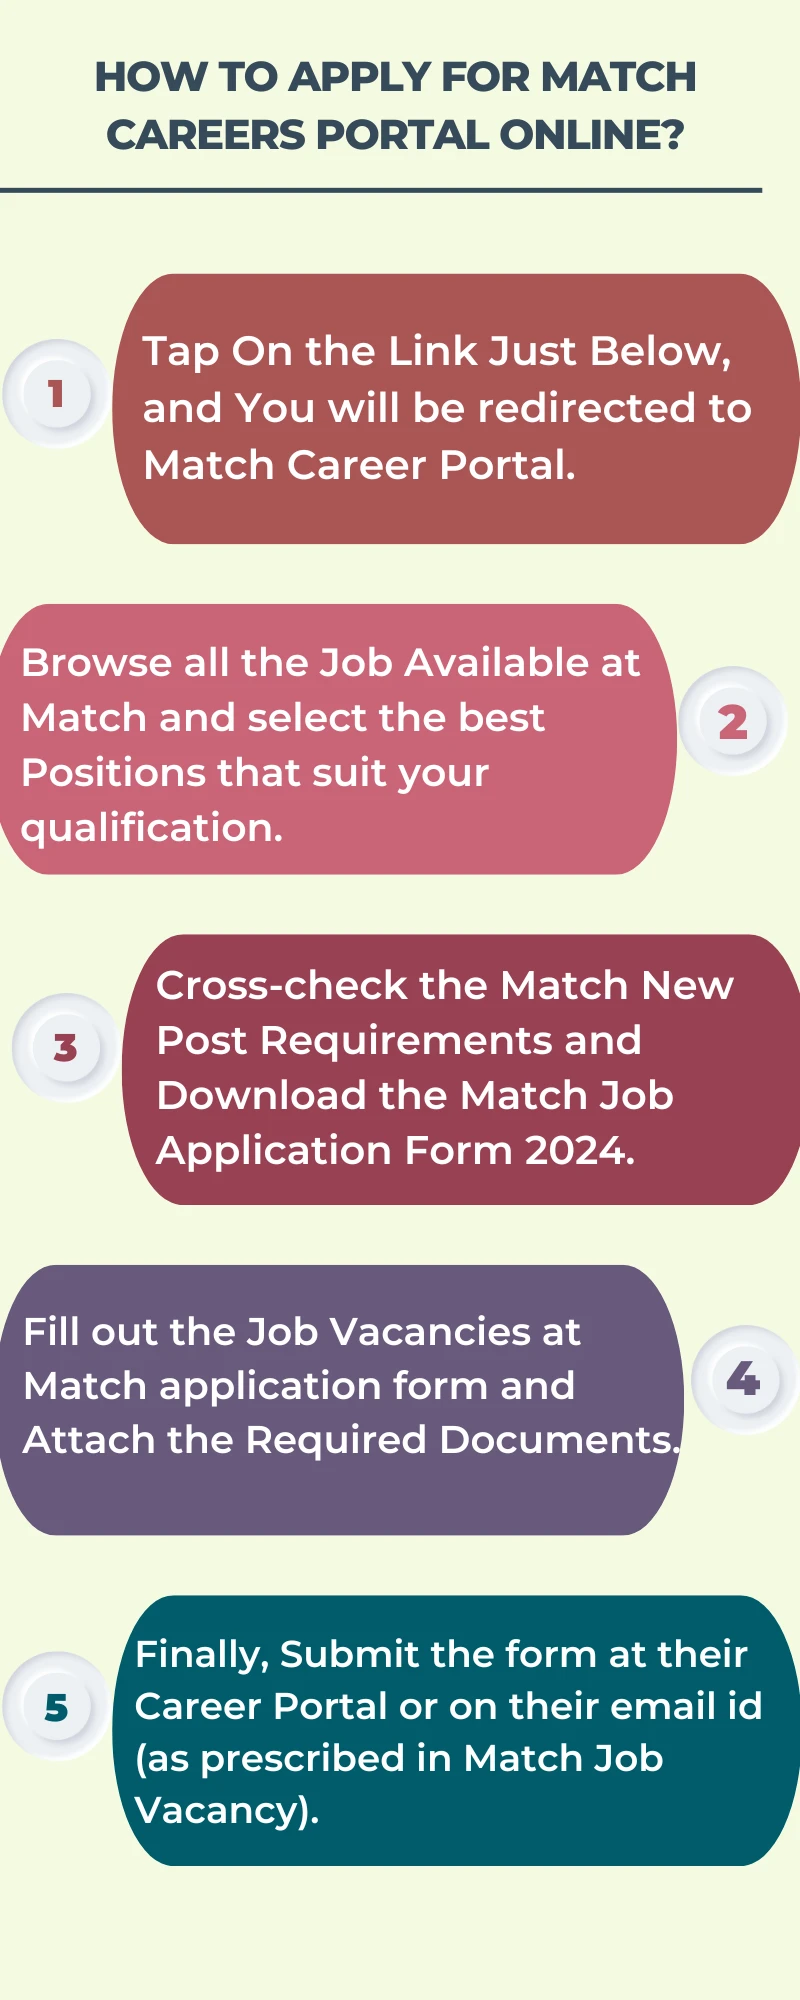 How To Apply for Match Careers Portal Online?